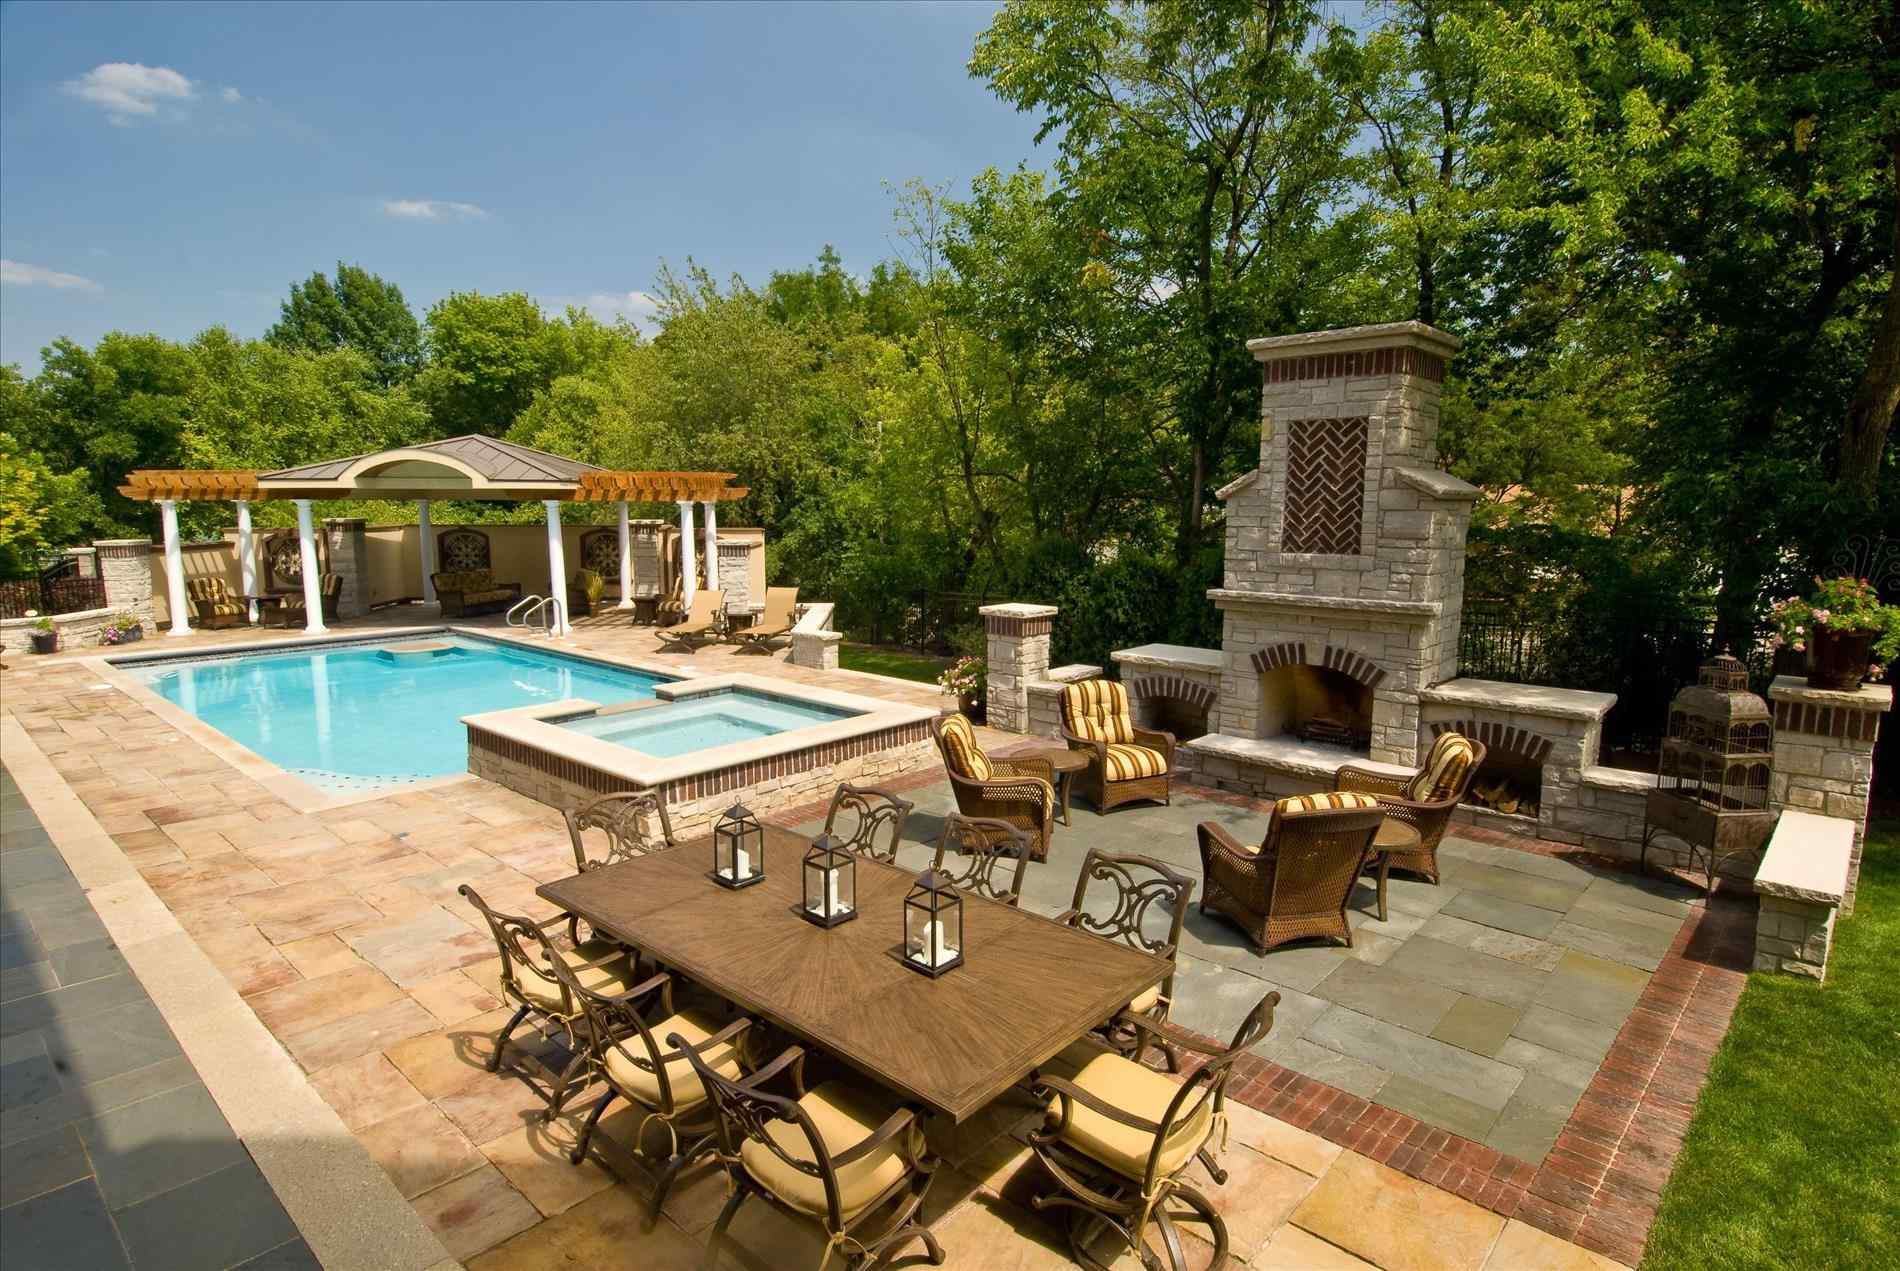 The Images Collection of House modern beautiful backyards with pools ...